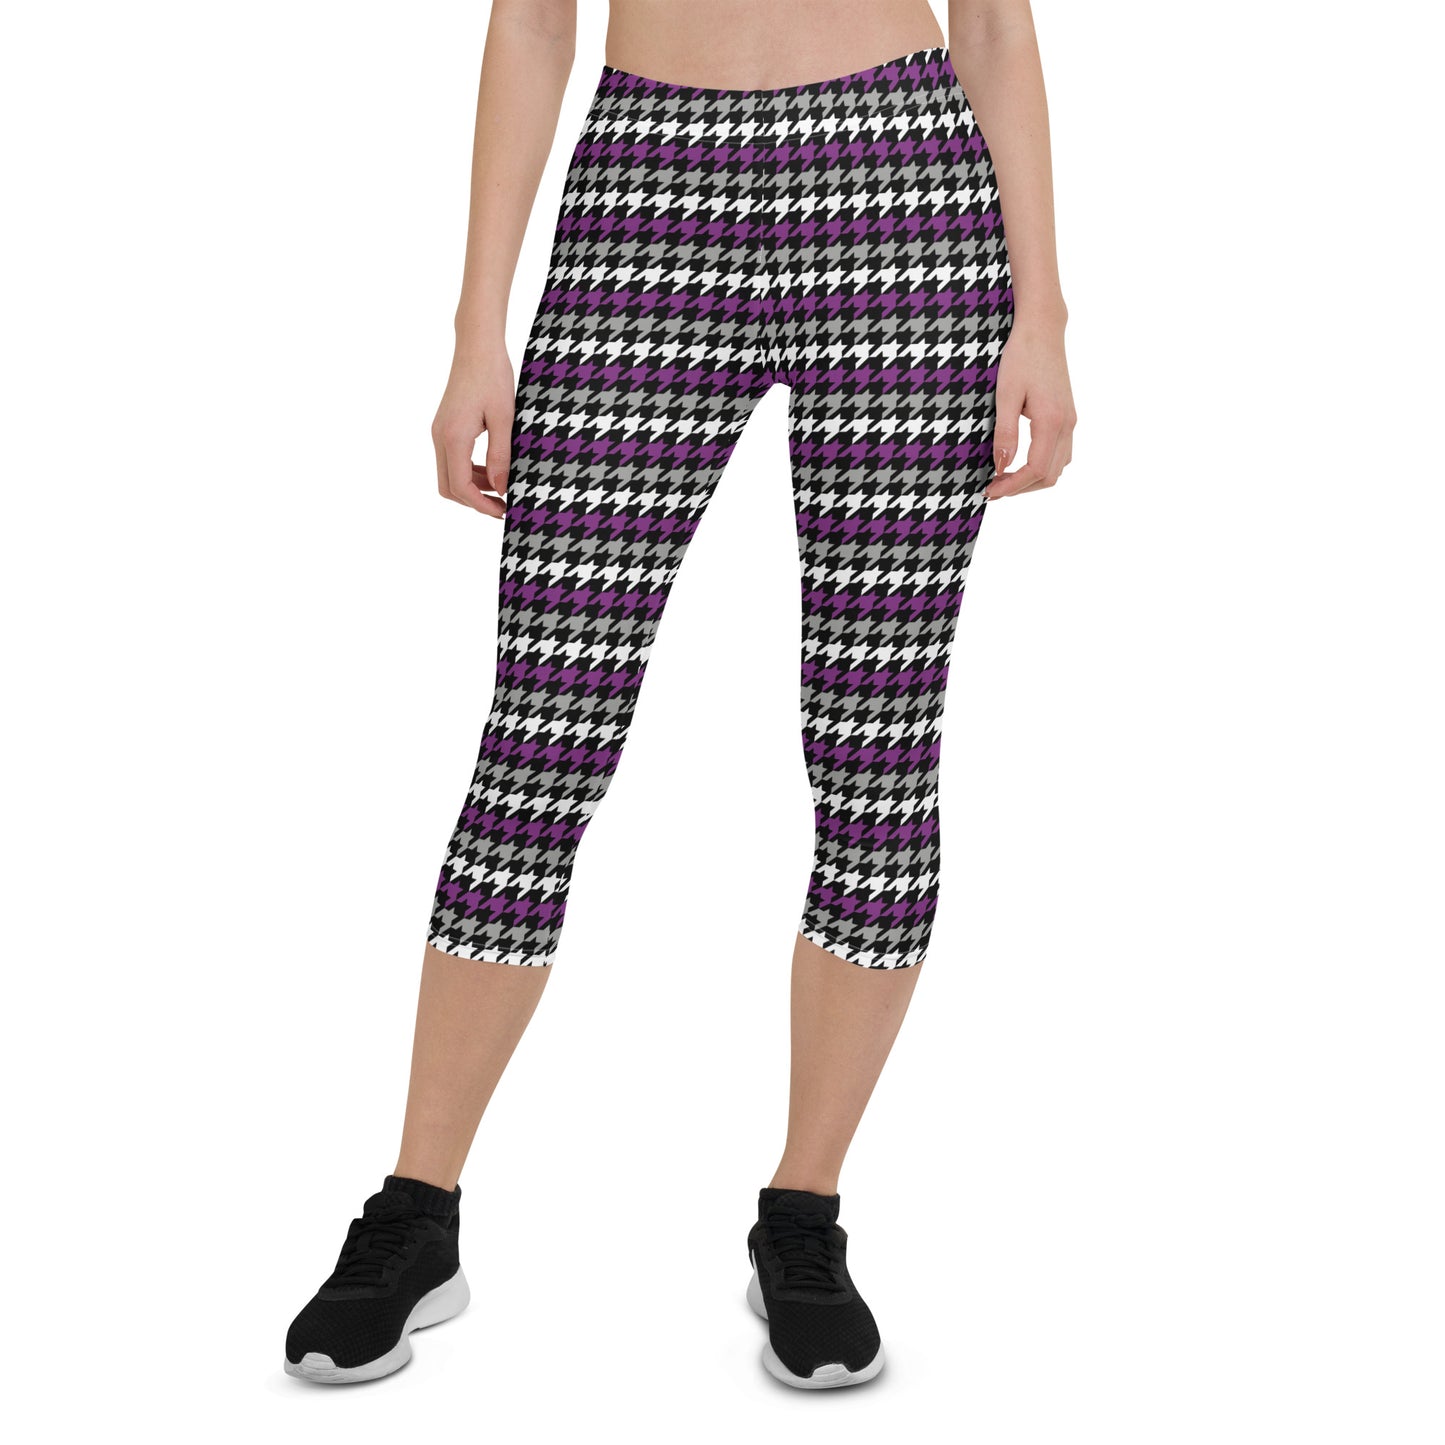 Asexual Pride Capri Leggings - LGBTQIA Black, Gray, Purple, and White  Flag Activewear Pants - Parade Club Vacation Running Workout